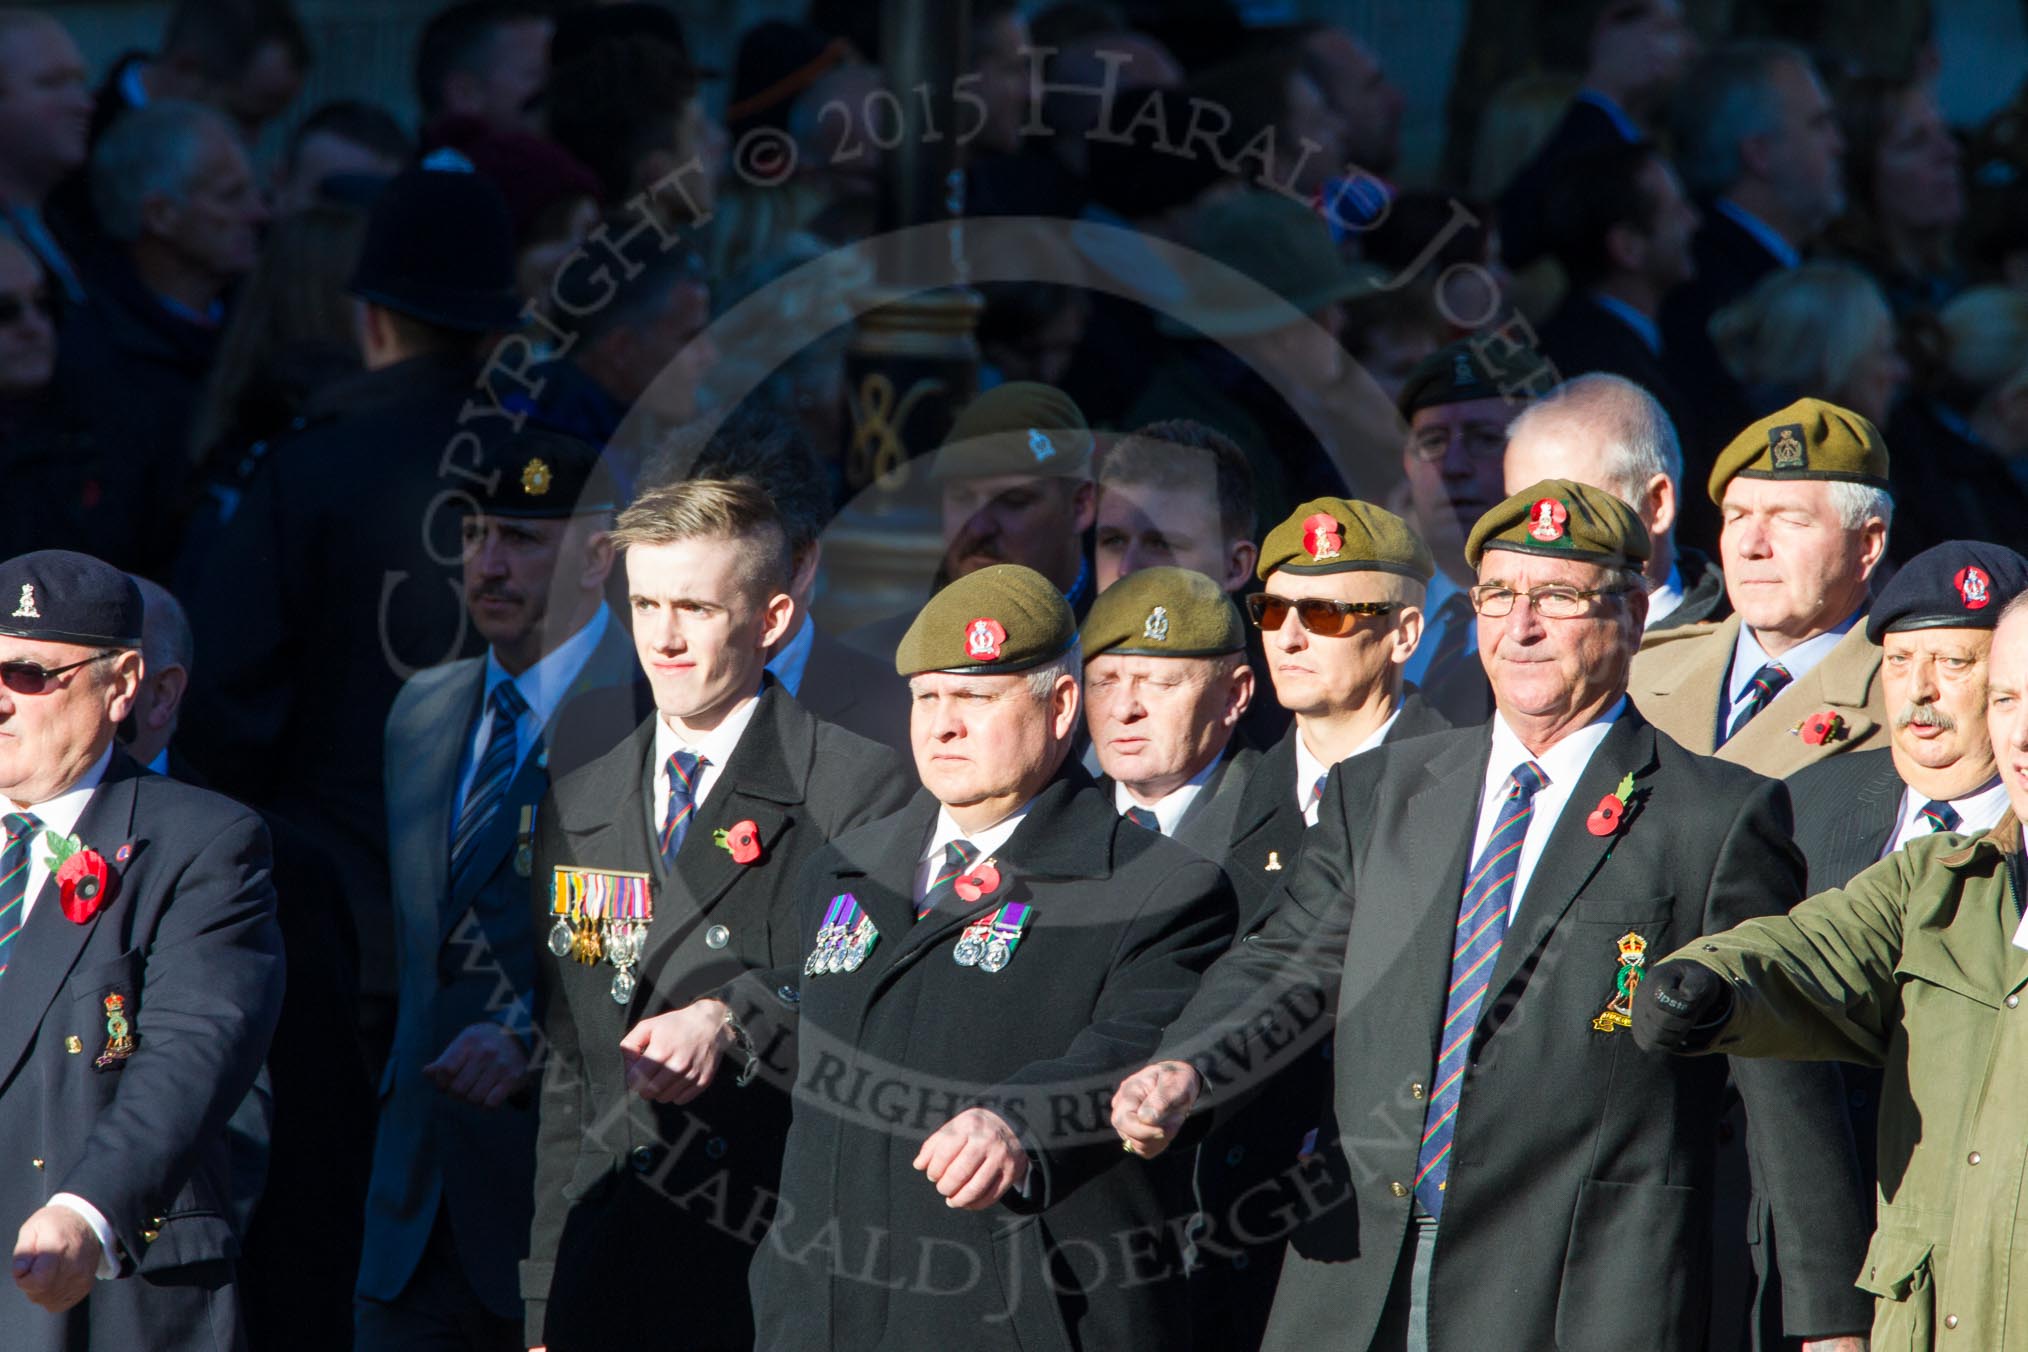 Remembrance Sunday Cenotaph March Past 2013: B29 - Royal Pioneer Corps Association..
Press stand opposite the Foreign Office building, Whitehall, London SW1,
London,
Greater London,
United Kingdom,
on 10 November 2013 at 12:03, image #1556